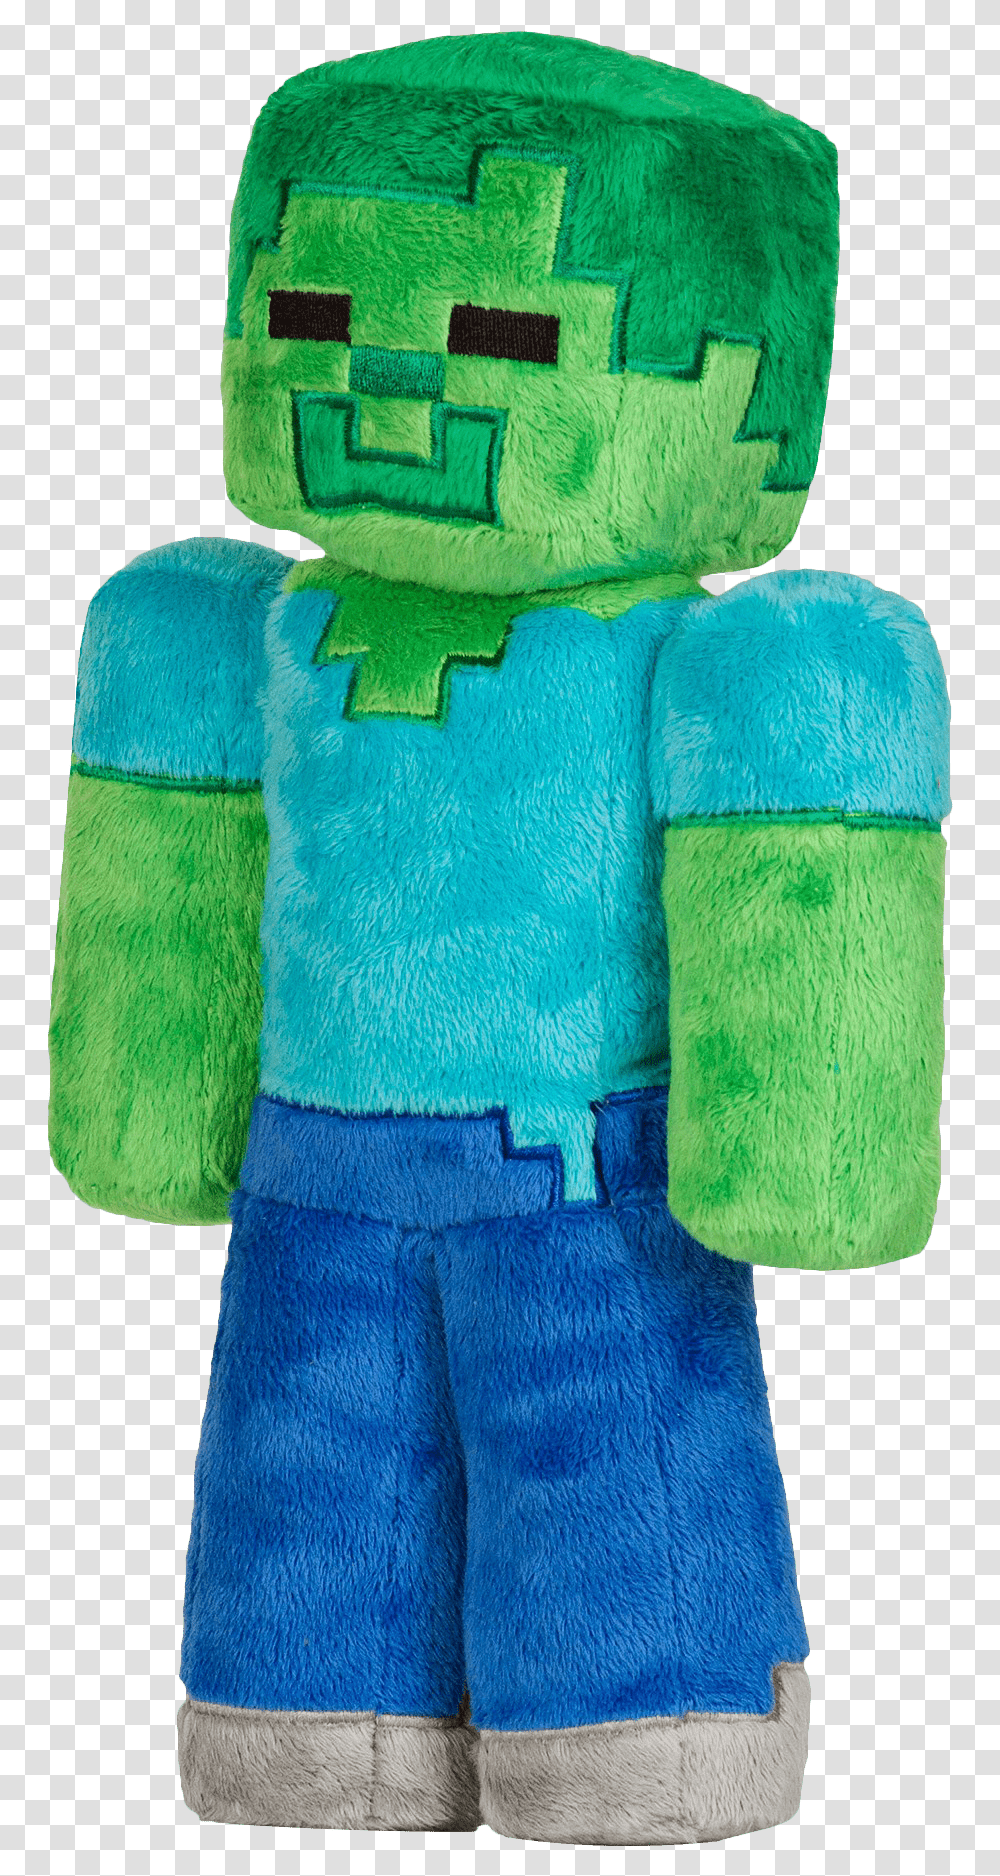 Minecraft 12'' Zombie Plush New Minecraft Zombie Plush, Toy, Sweets, Food, Confectionery Transparent Png